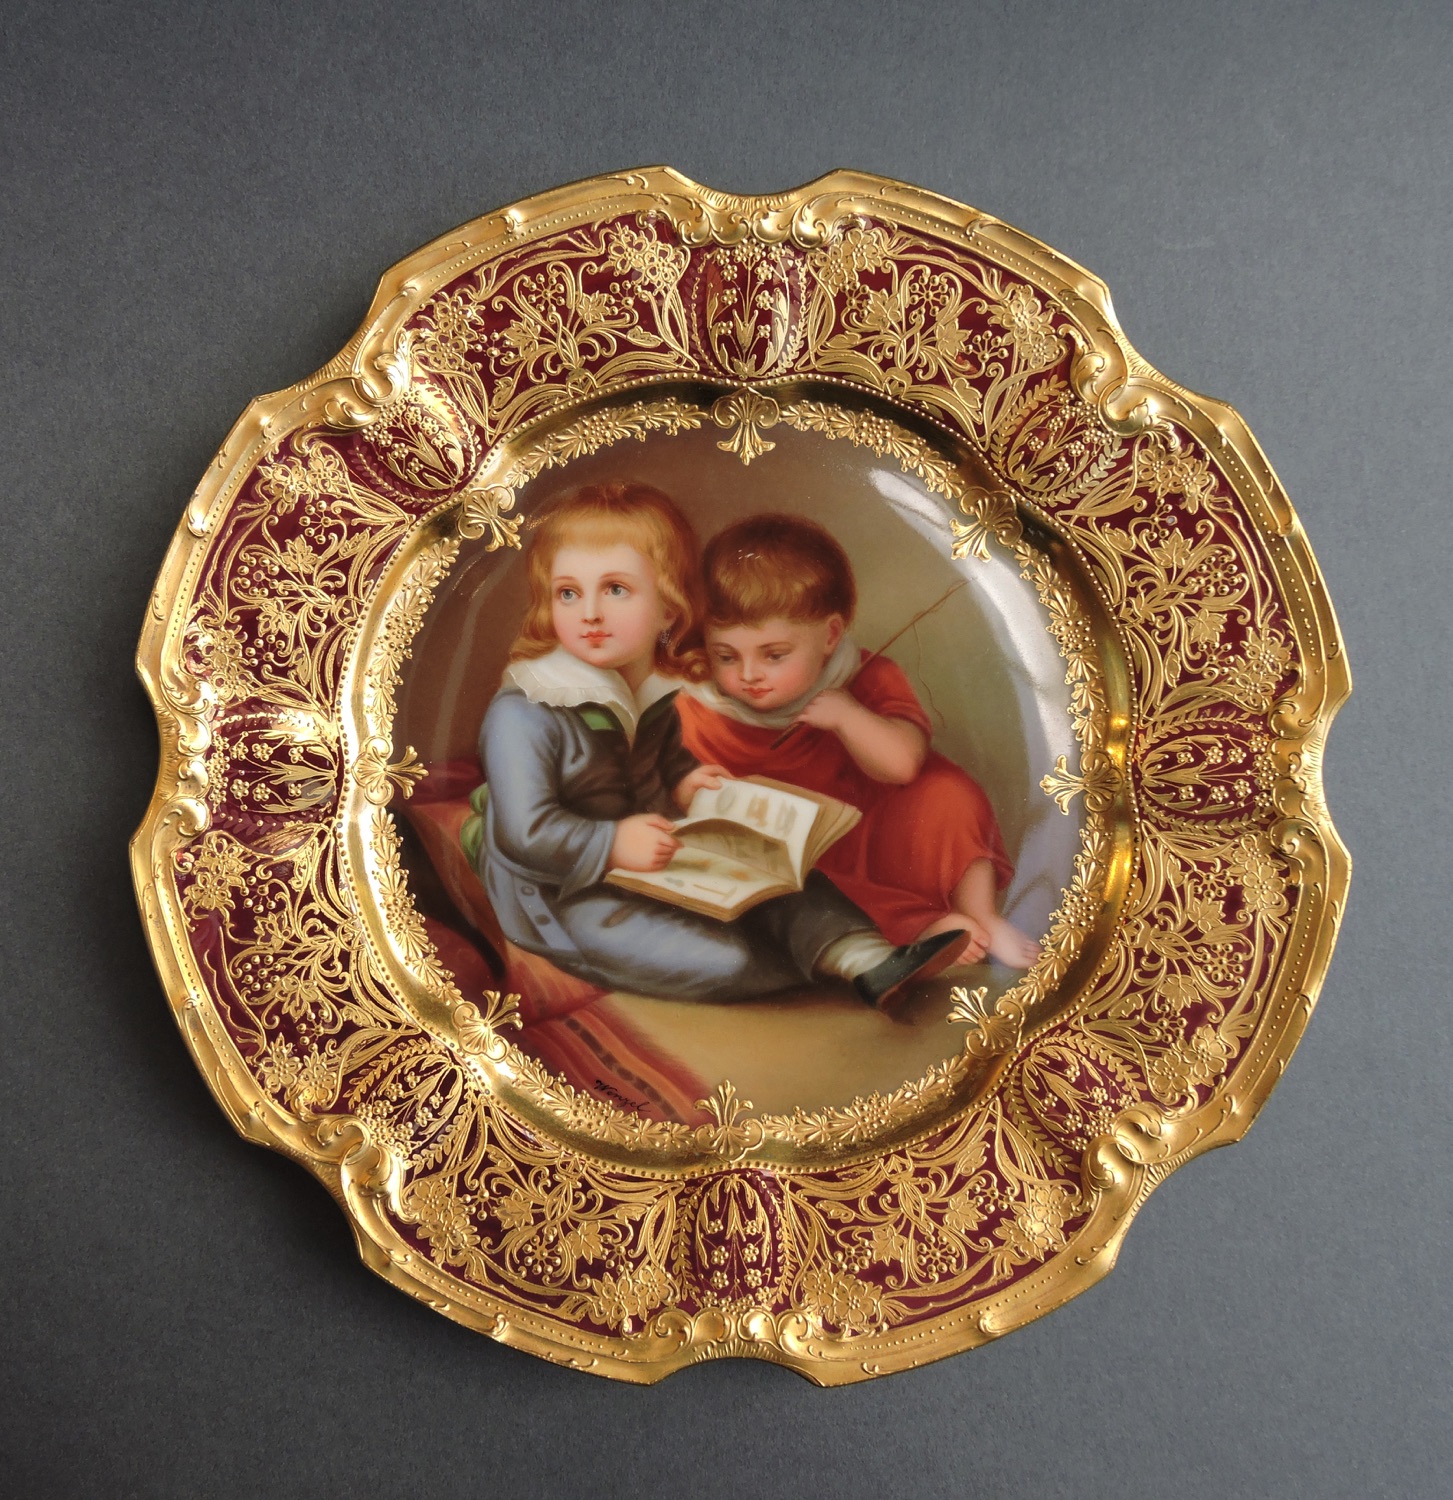 Painting of two children by Vogel - Royal Vienna style plate